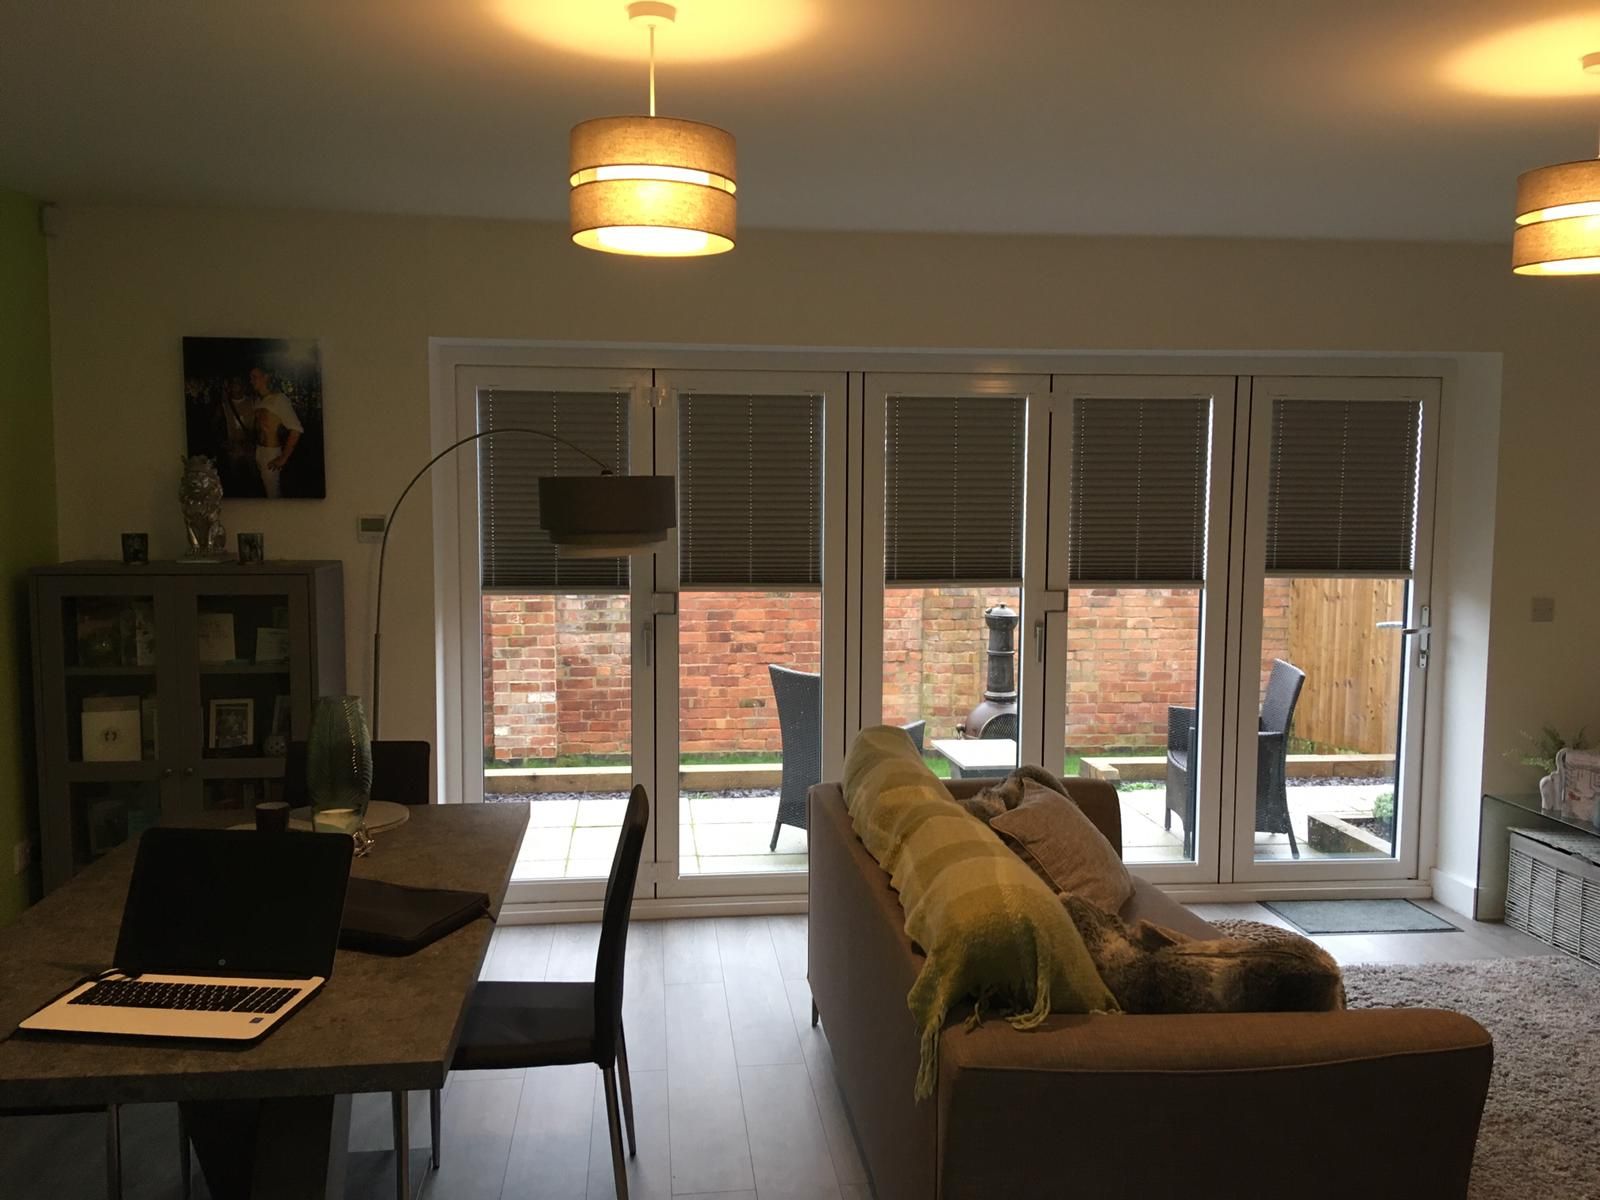 UK Suppliers of Space-Saving Pleated Blinds